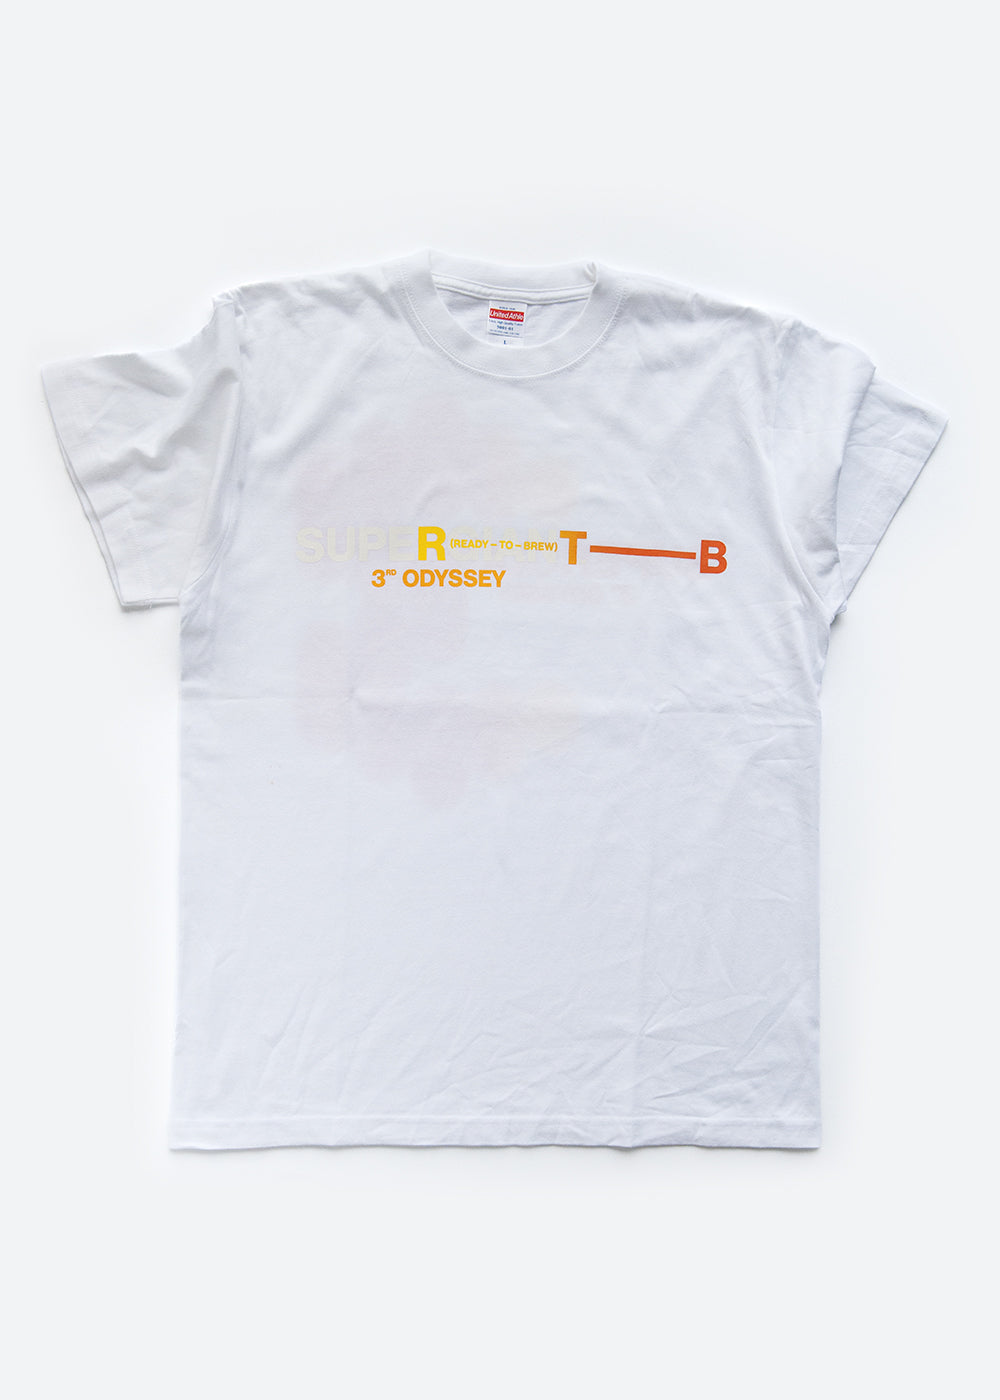 SUPERGIANT™ 3RD ODYSSEY T-SHIRT WHITE